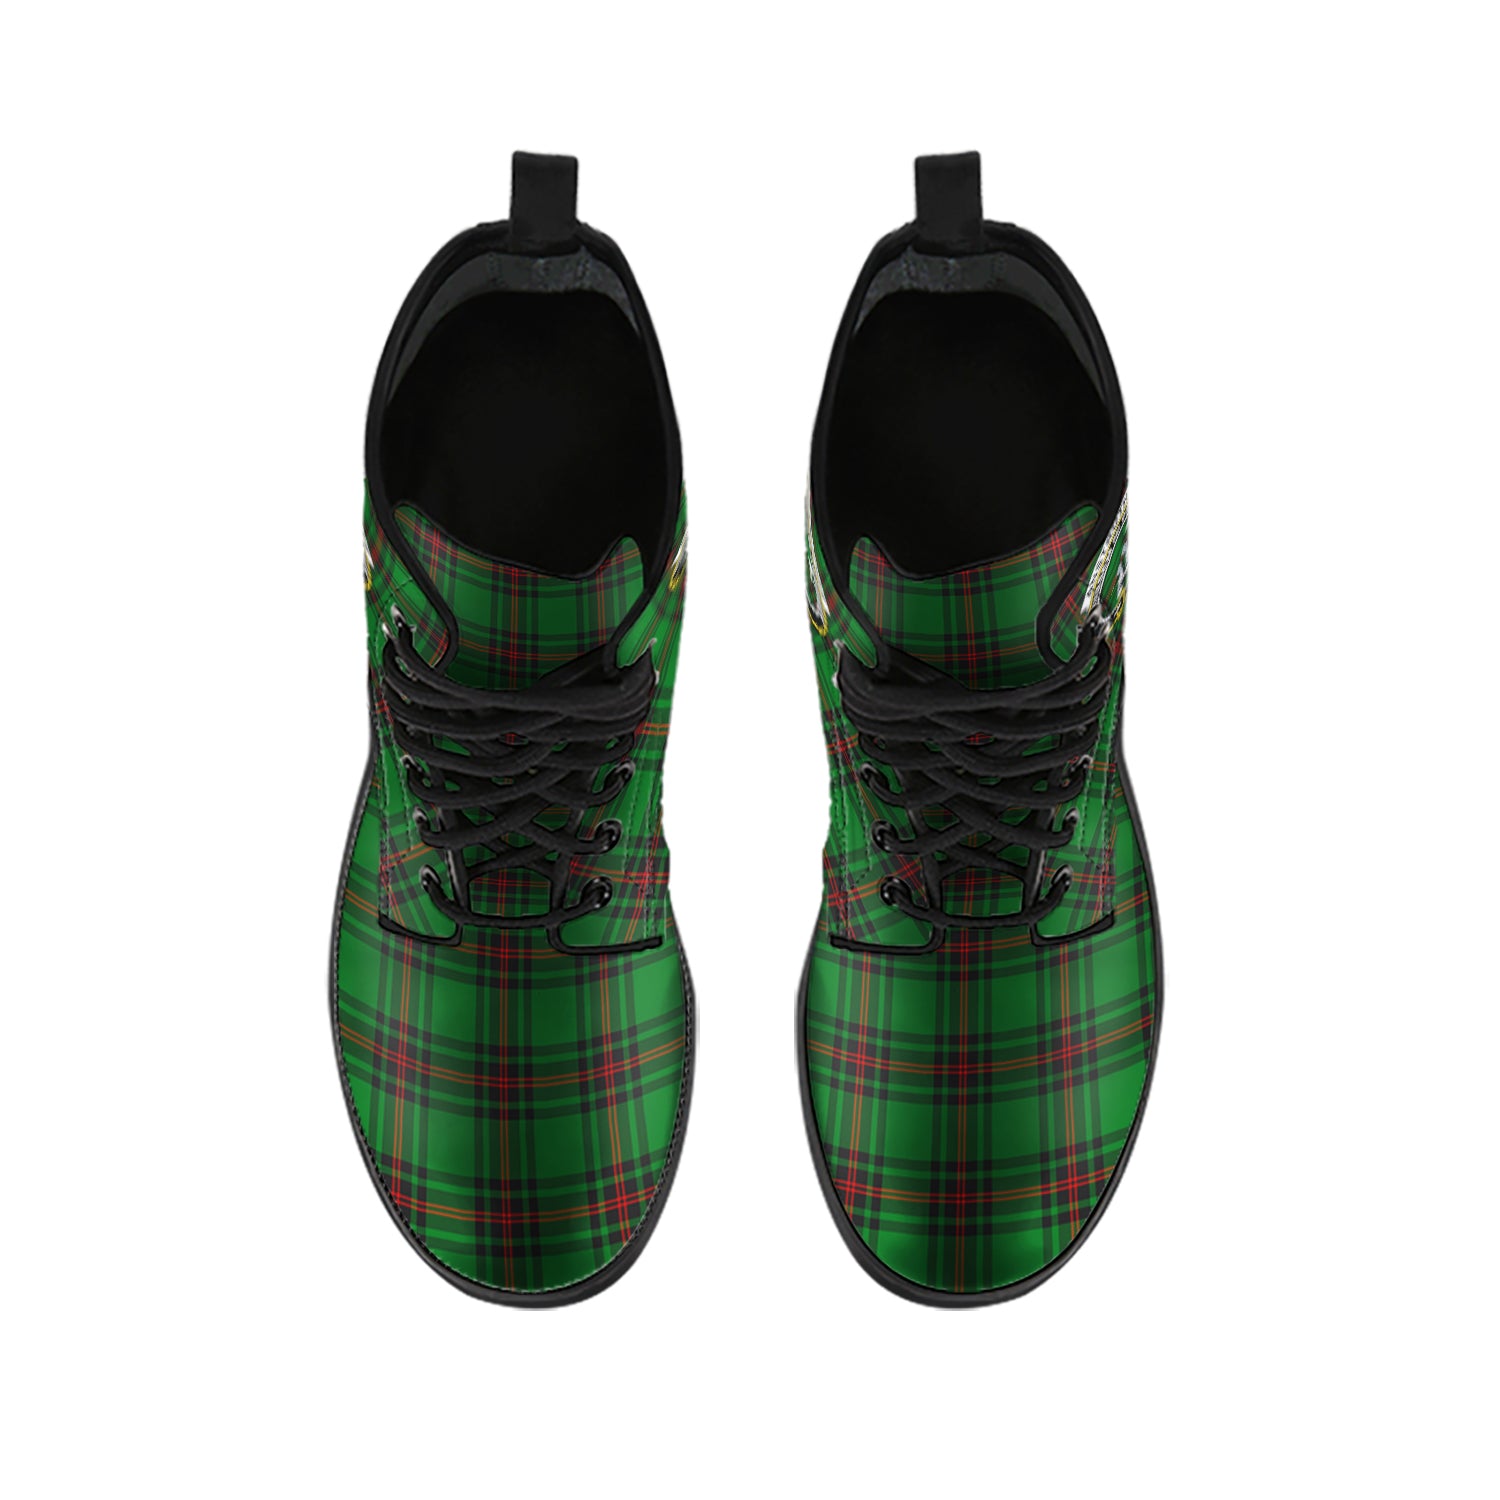 Anstruther Tartan Leather Boots with Family Crest - Tartanvibesclothing